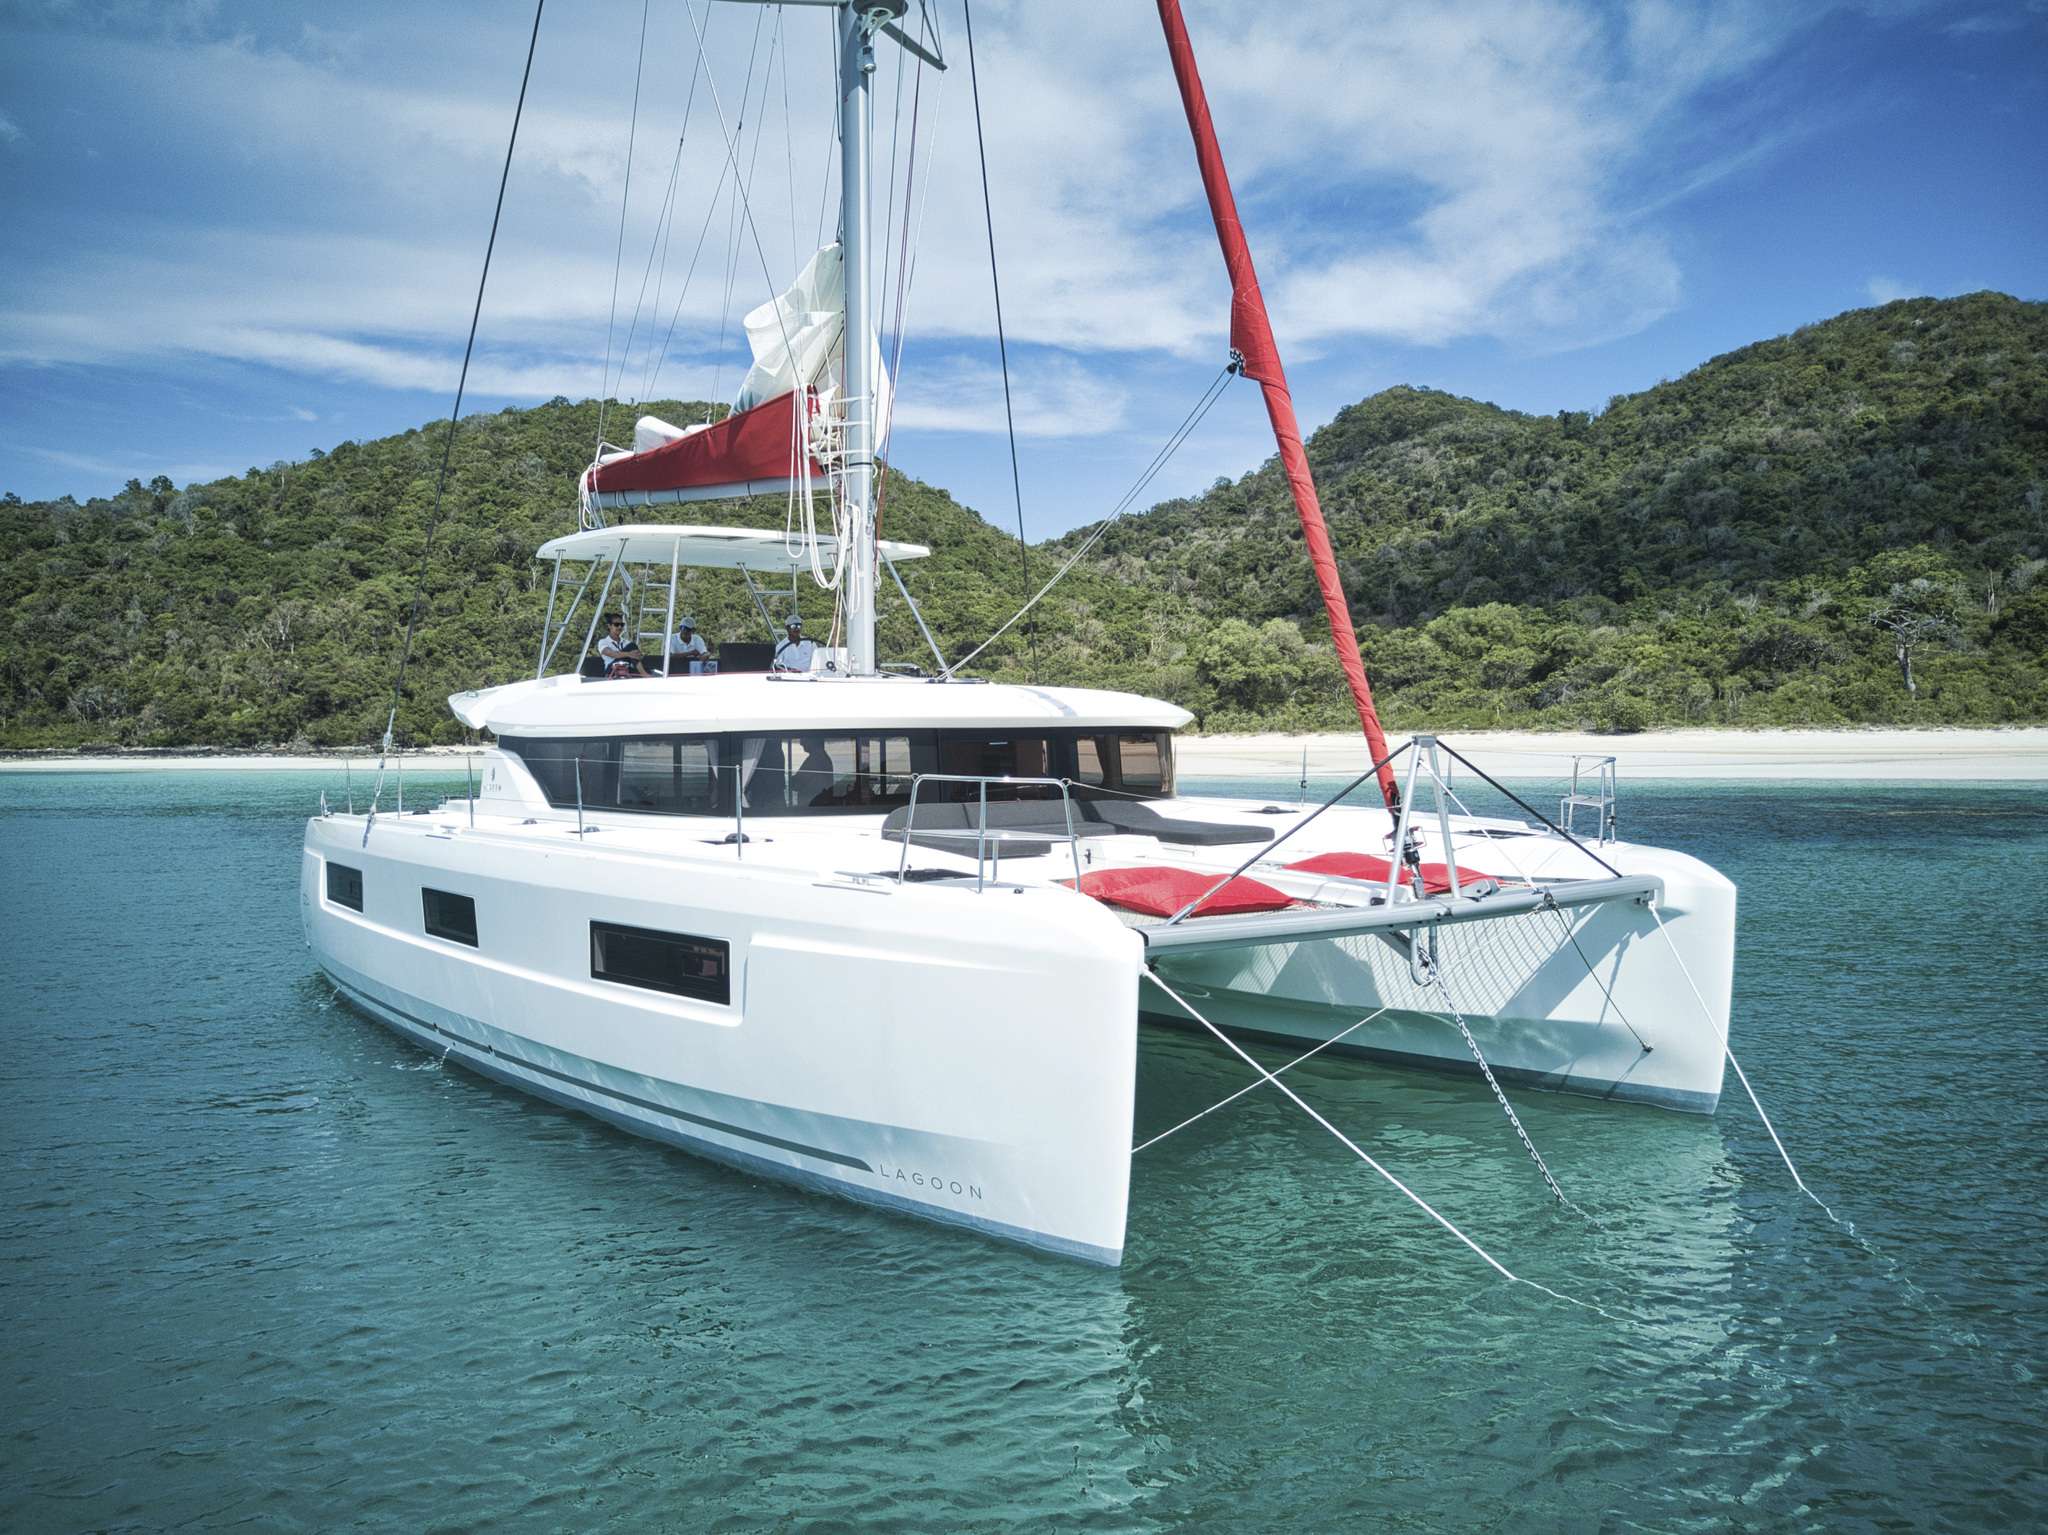 Maverick - Luxury yacht charter Thailand & Boat hire in SE Asia 1